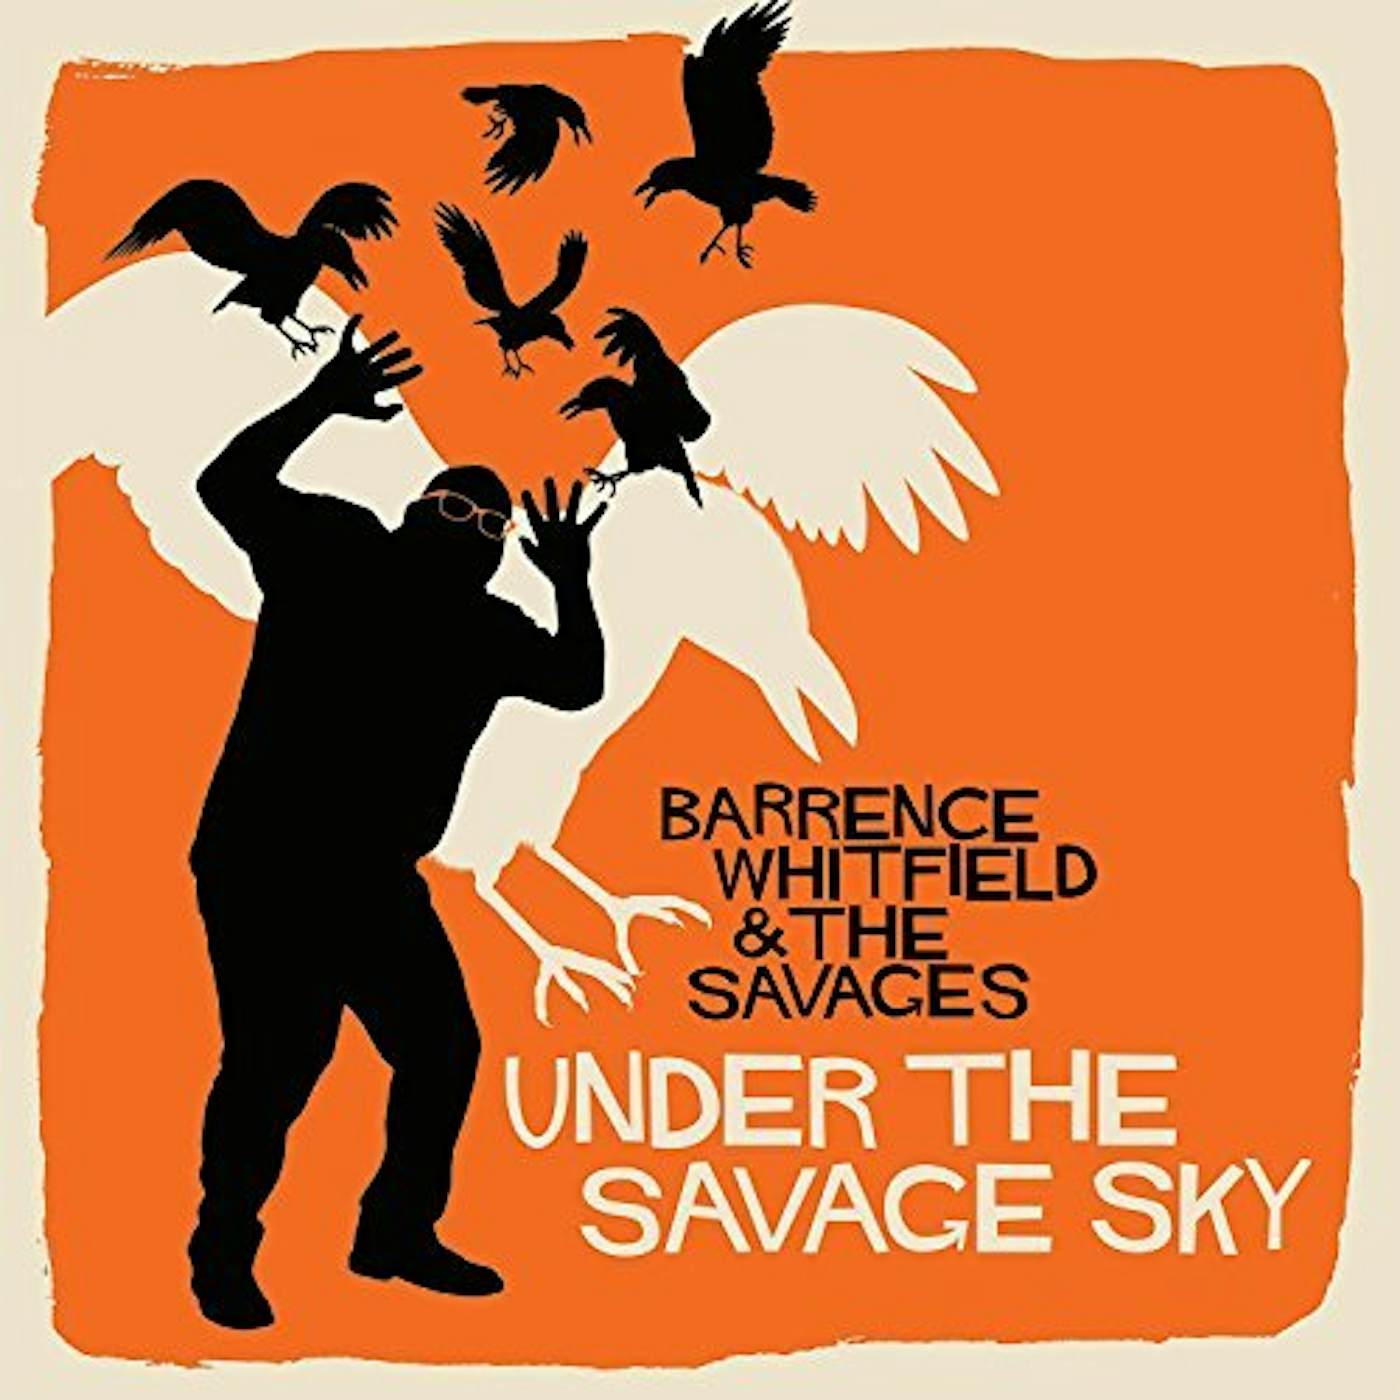 Barrence Whitfield & The Savages Under The Savage Sky Vinyl Record